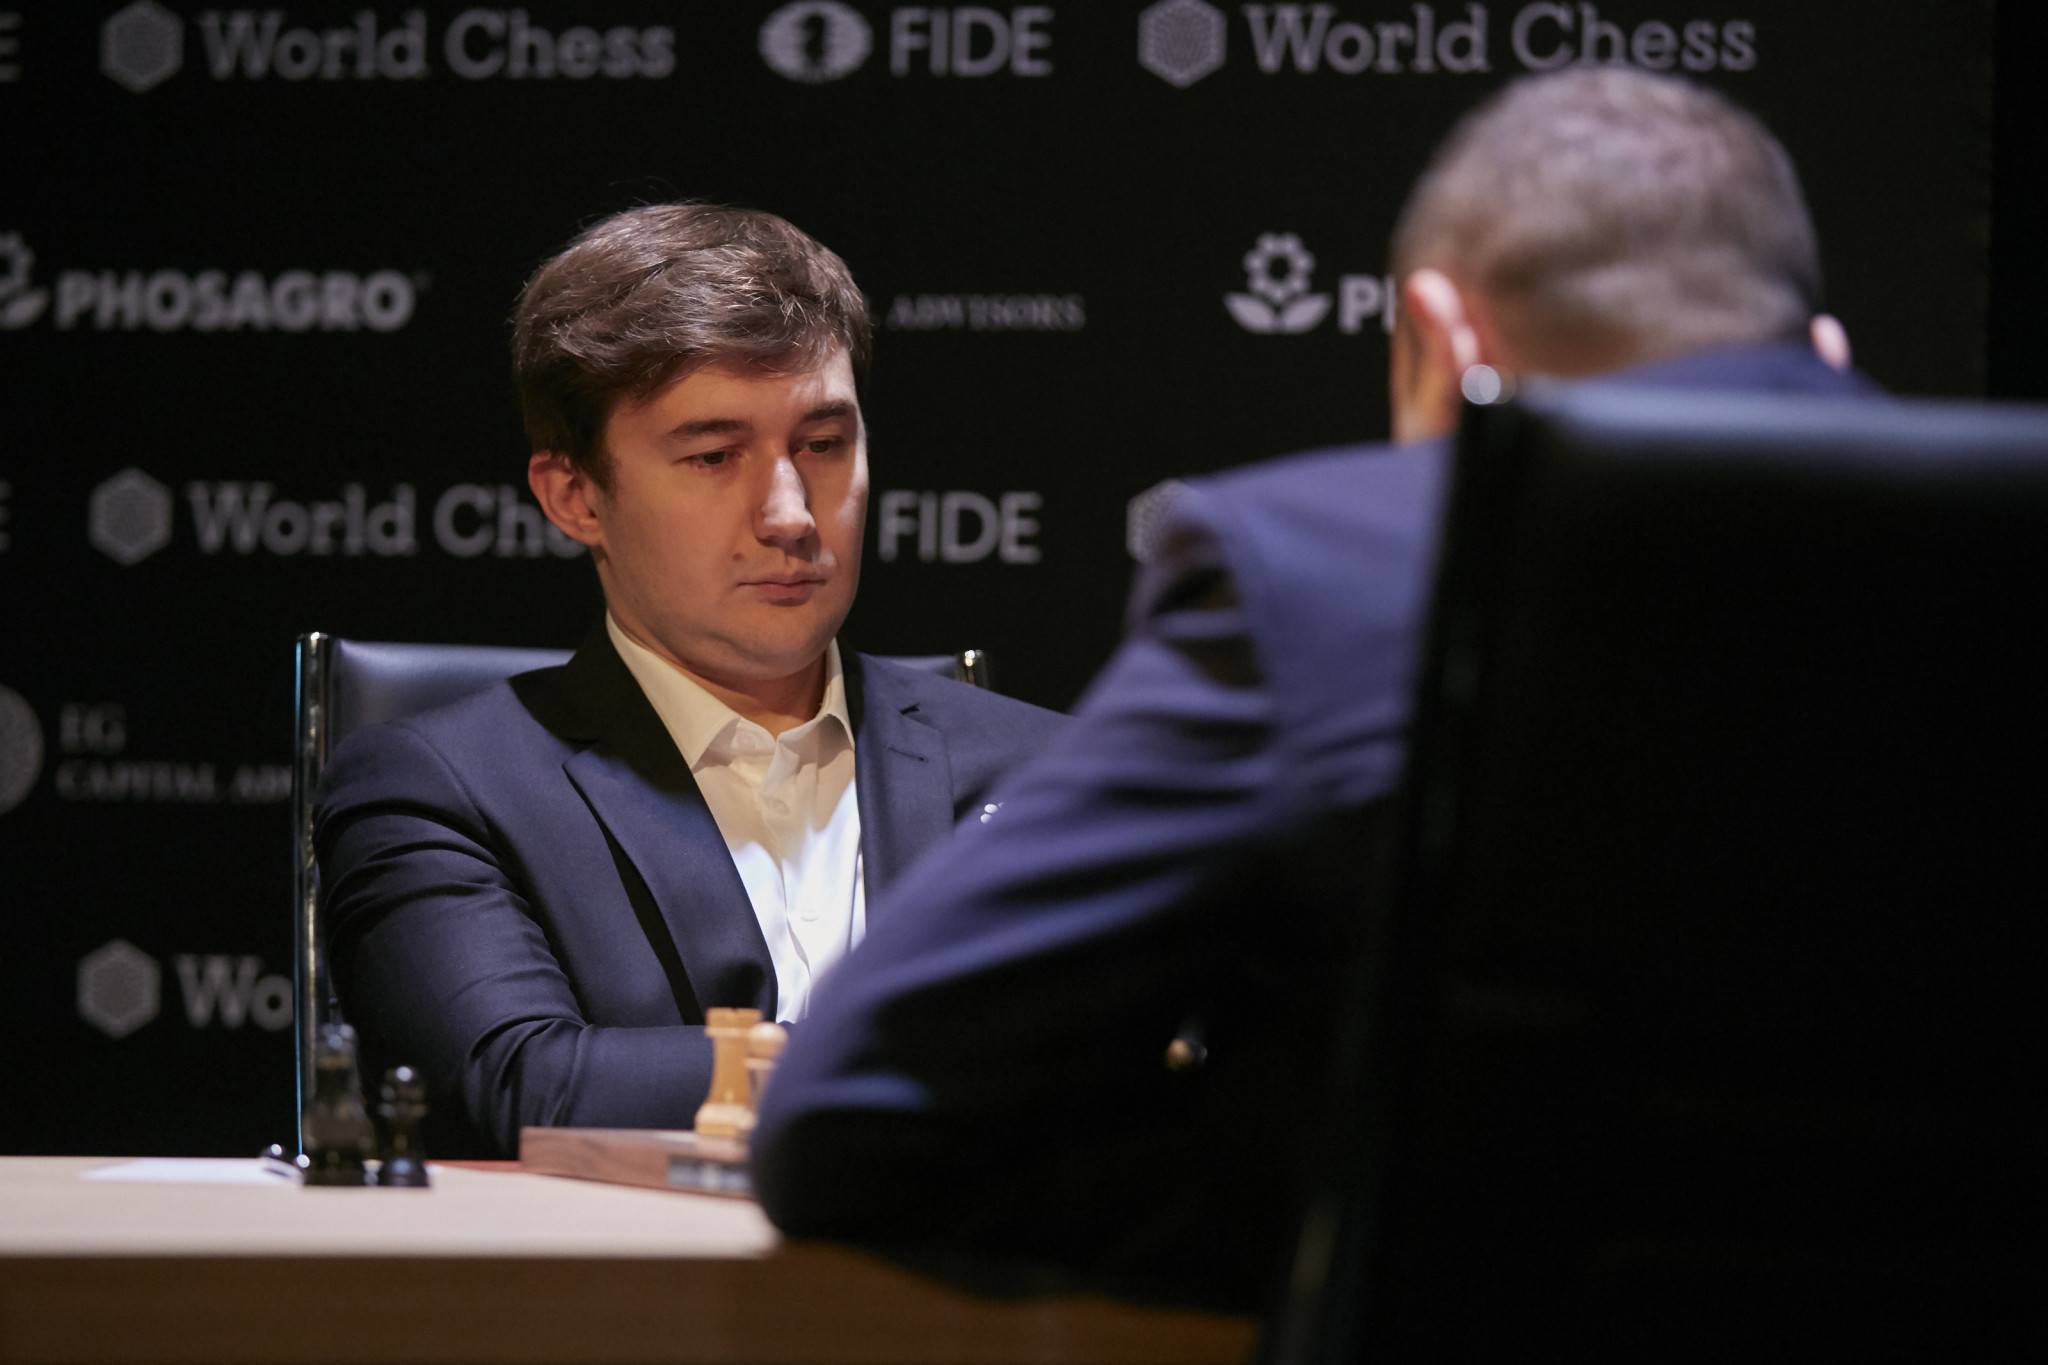 FIDE bans Russia's Karjakin for supporting Ukraine invasion